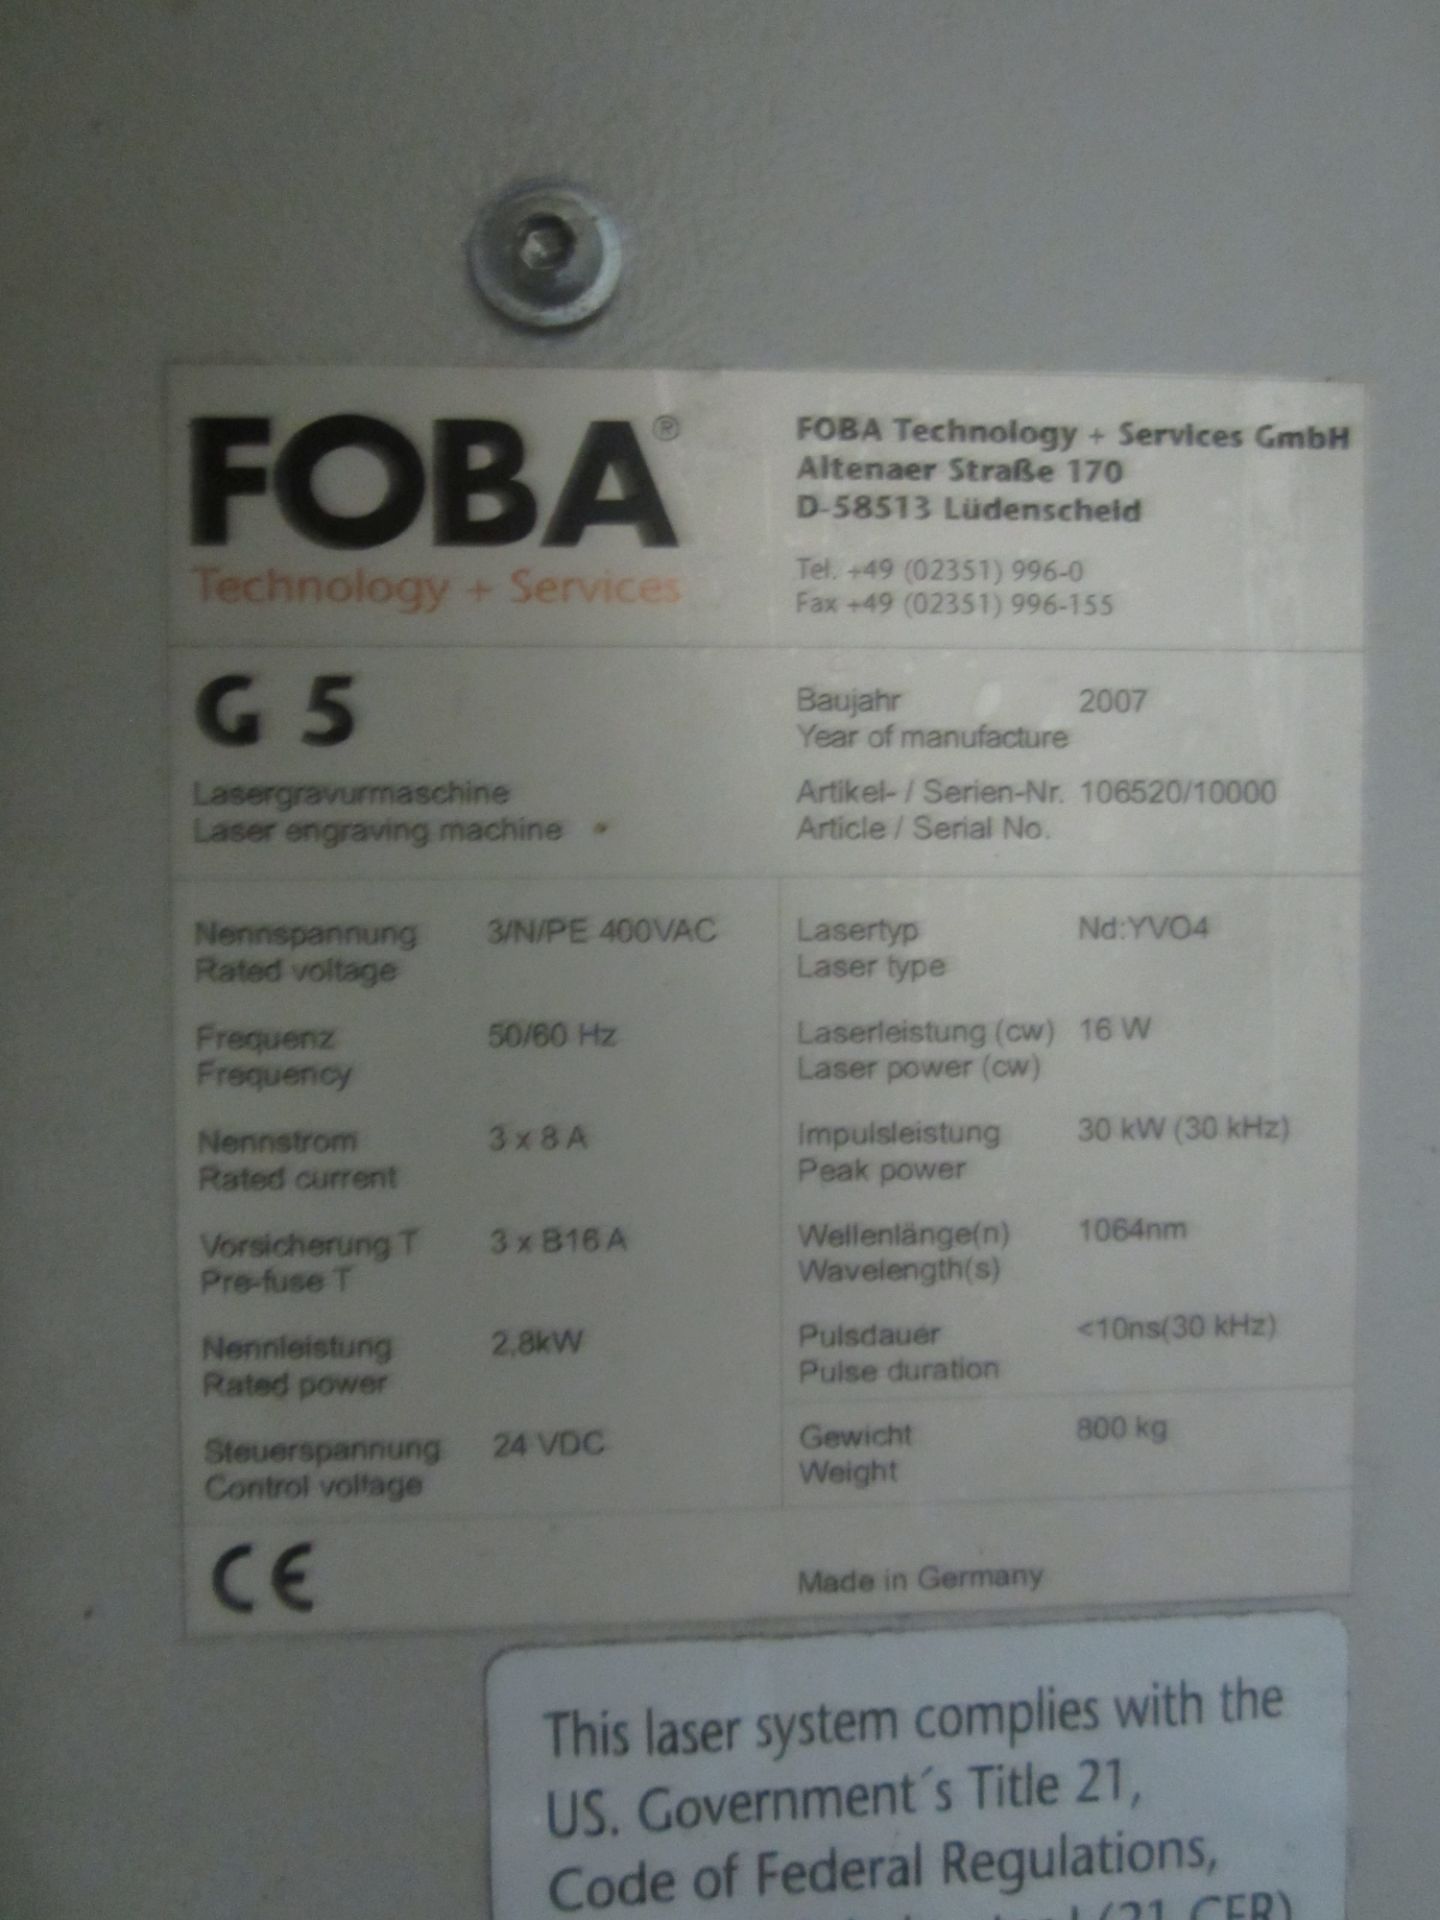 Foba Model G5 CNC Laser Parts Marker, s/n 106520/10000, New 2007, 4th Axis Indexer, 4.72" X 4.72" - Image 13 of 13